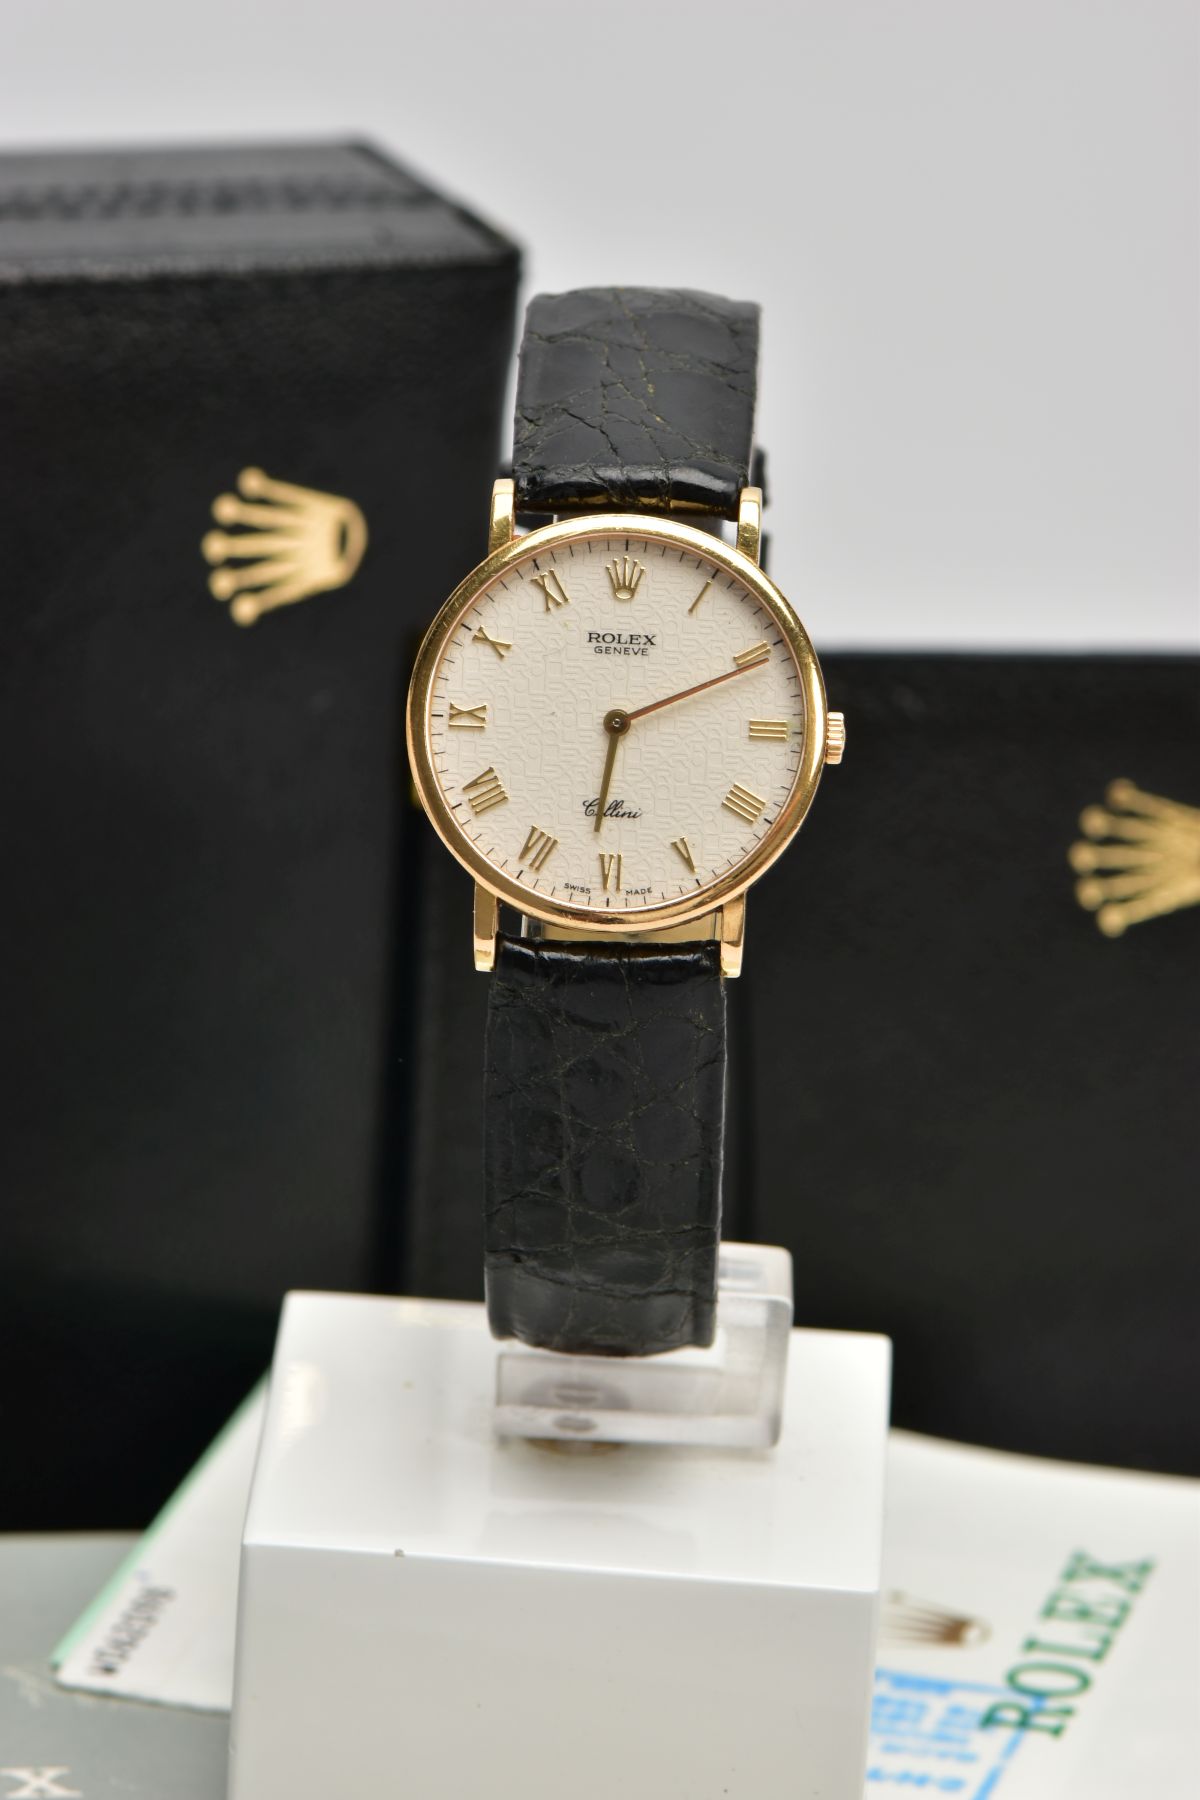 AN 18CT ROLEX CELLINI WRISTWATCH, silvered jubilee dial with gold roman numerals and the Rolex